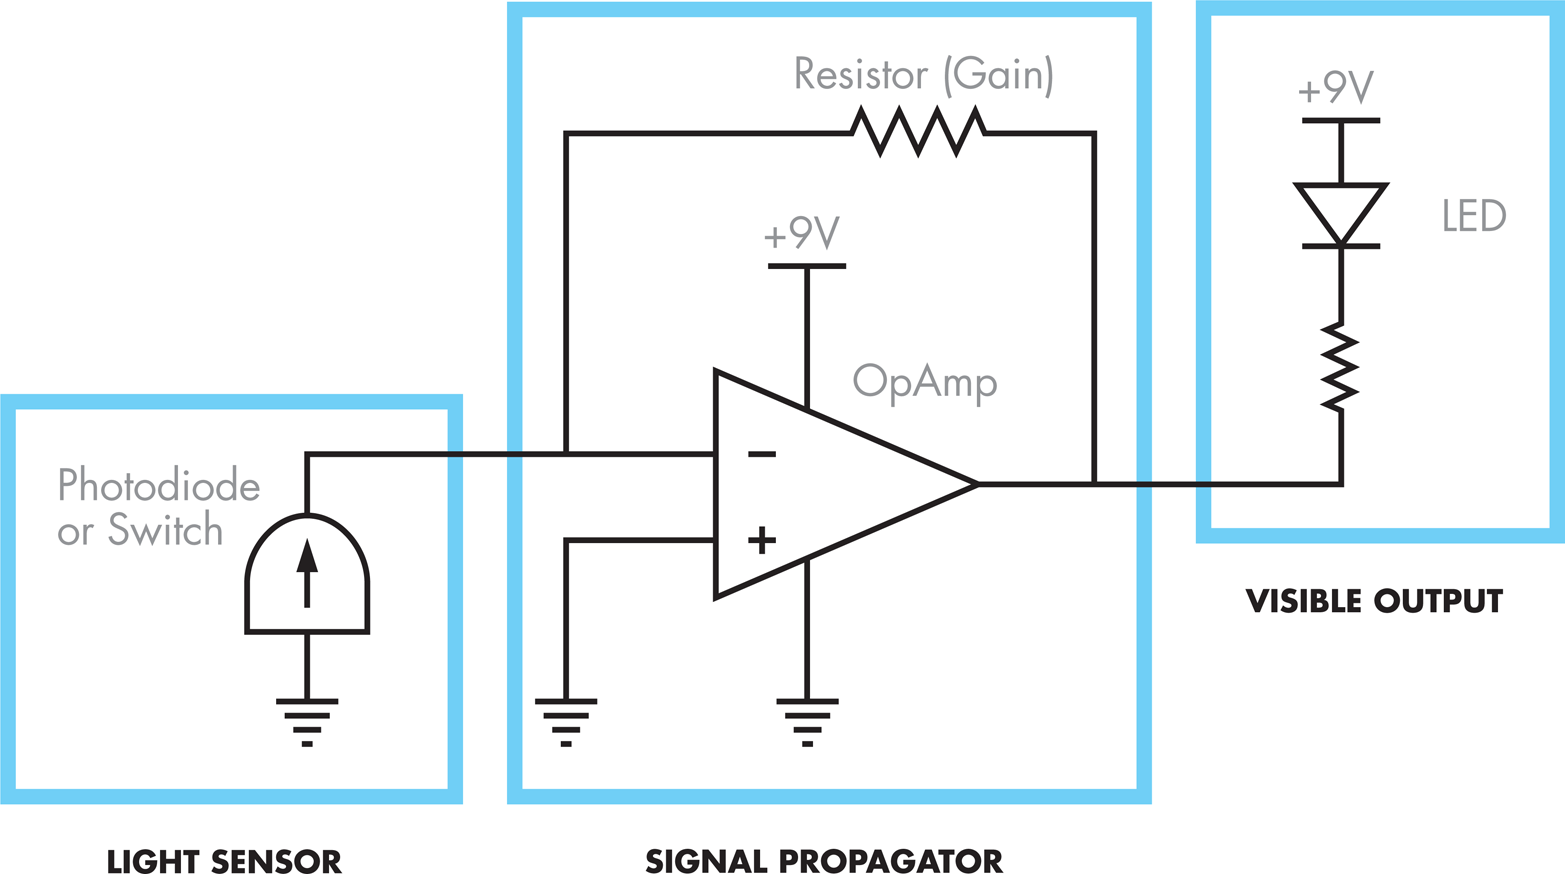 A schematic representation of the bacterial photography system electrical model. The light sensor (left), which is either a photodiode or a switch, corresponds to the light-detecting device. The visible output (right), an LED (light-emitting diode), corresponds to the color-generating device. A variety of components can connect the light detector and the LED to model signal propagation that occurs within the cell.